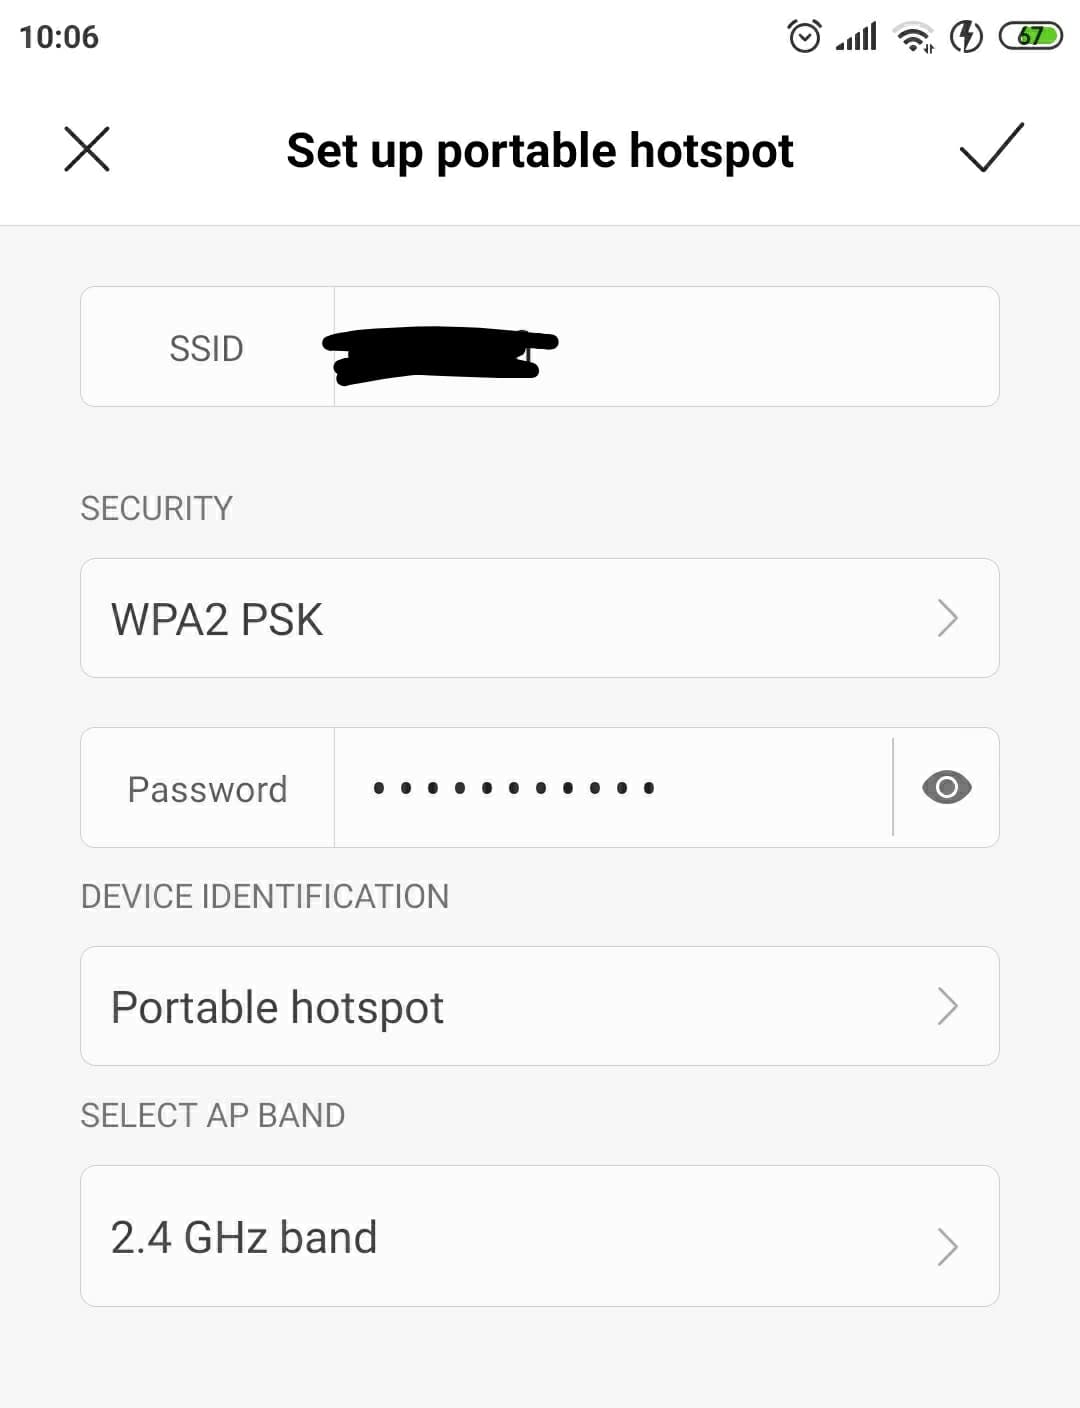 Screenshot of Android settings for how to set up a portable hotspot, specifically for SSID, WPA2 and password